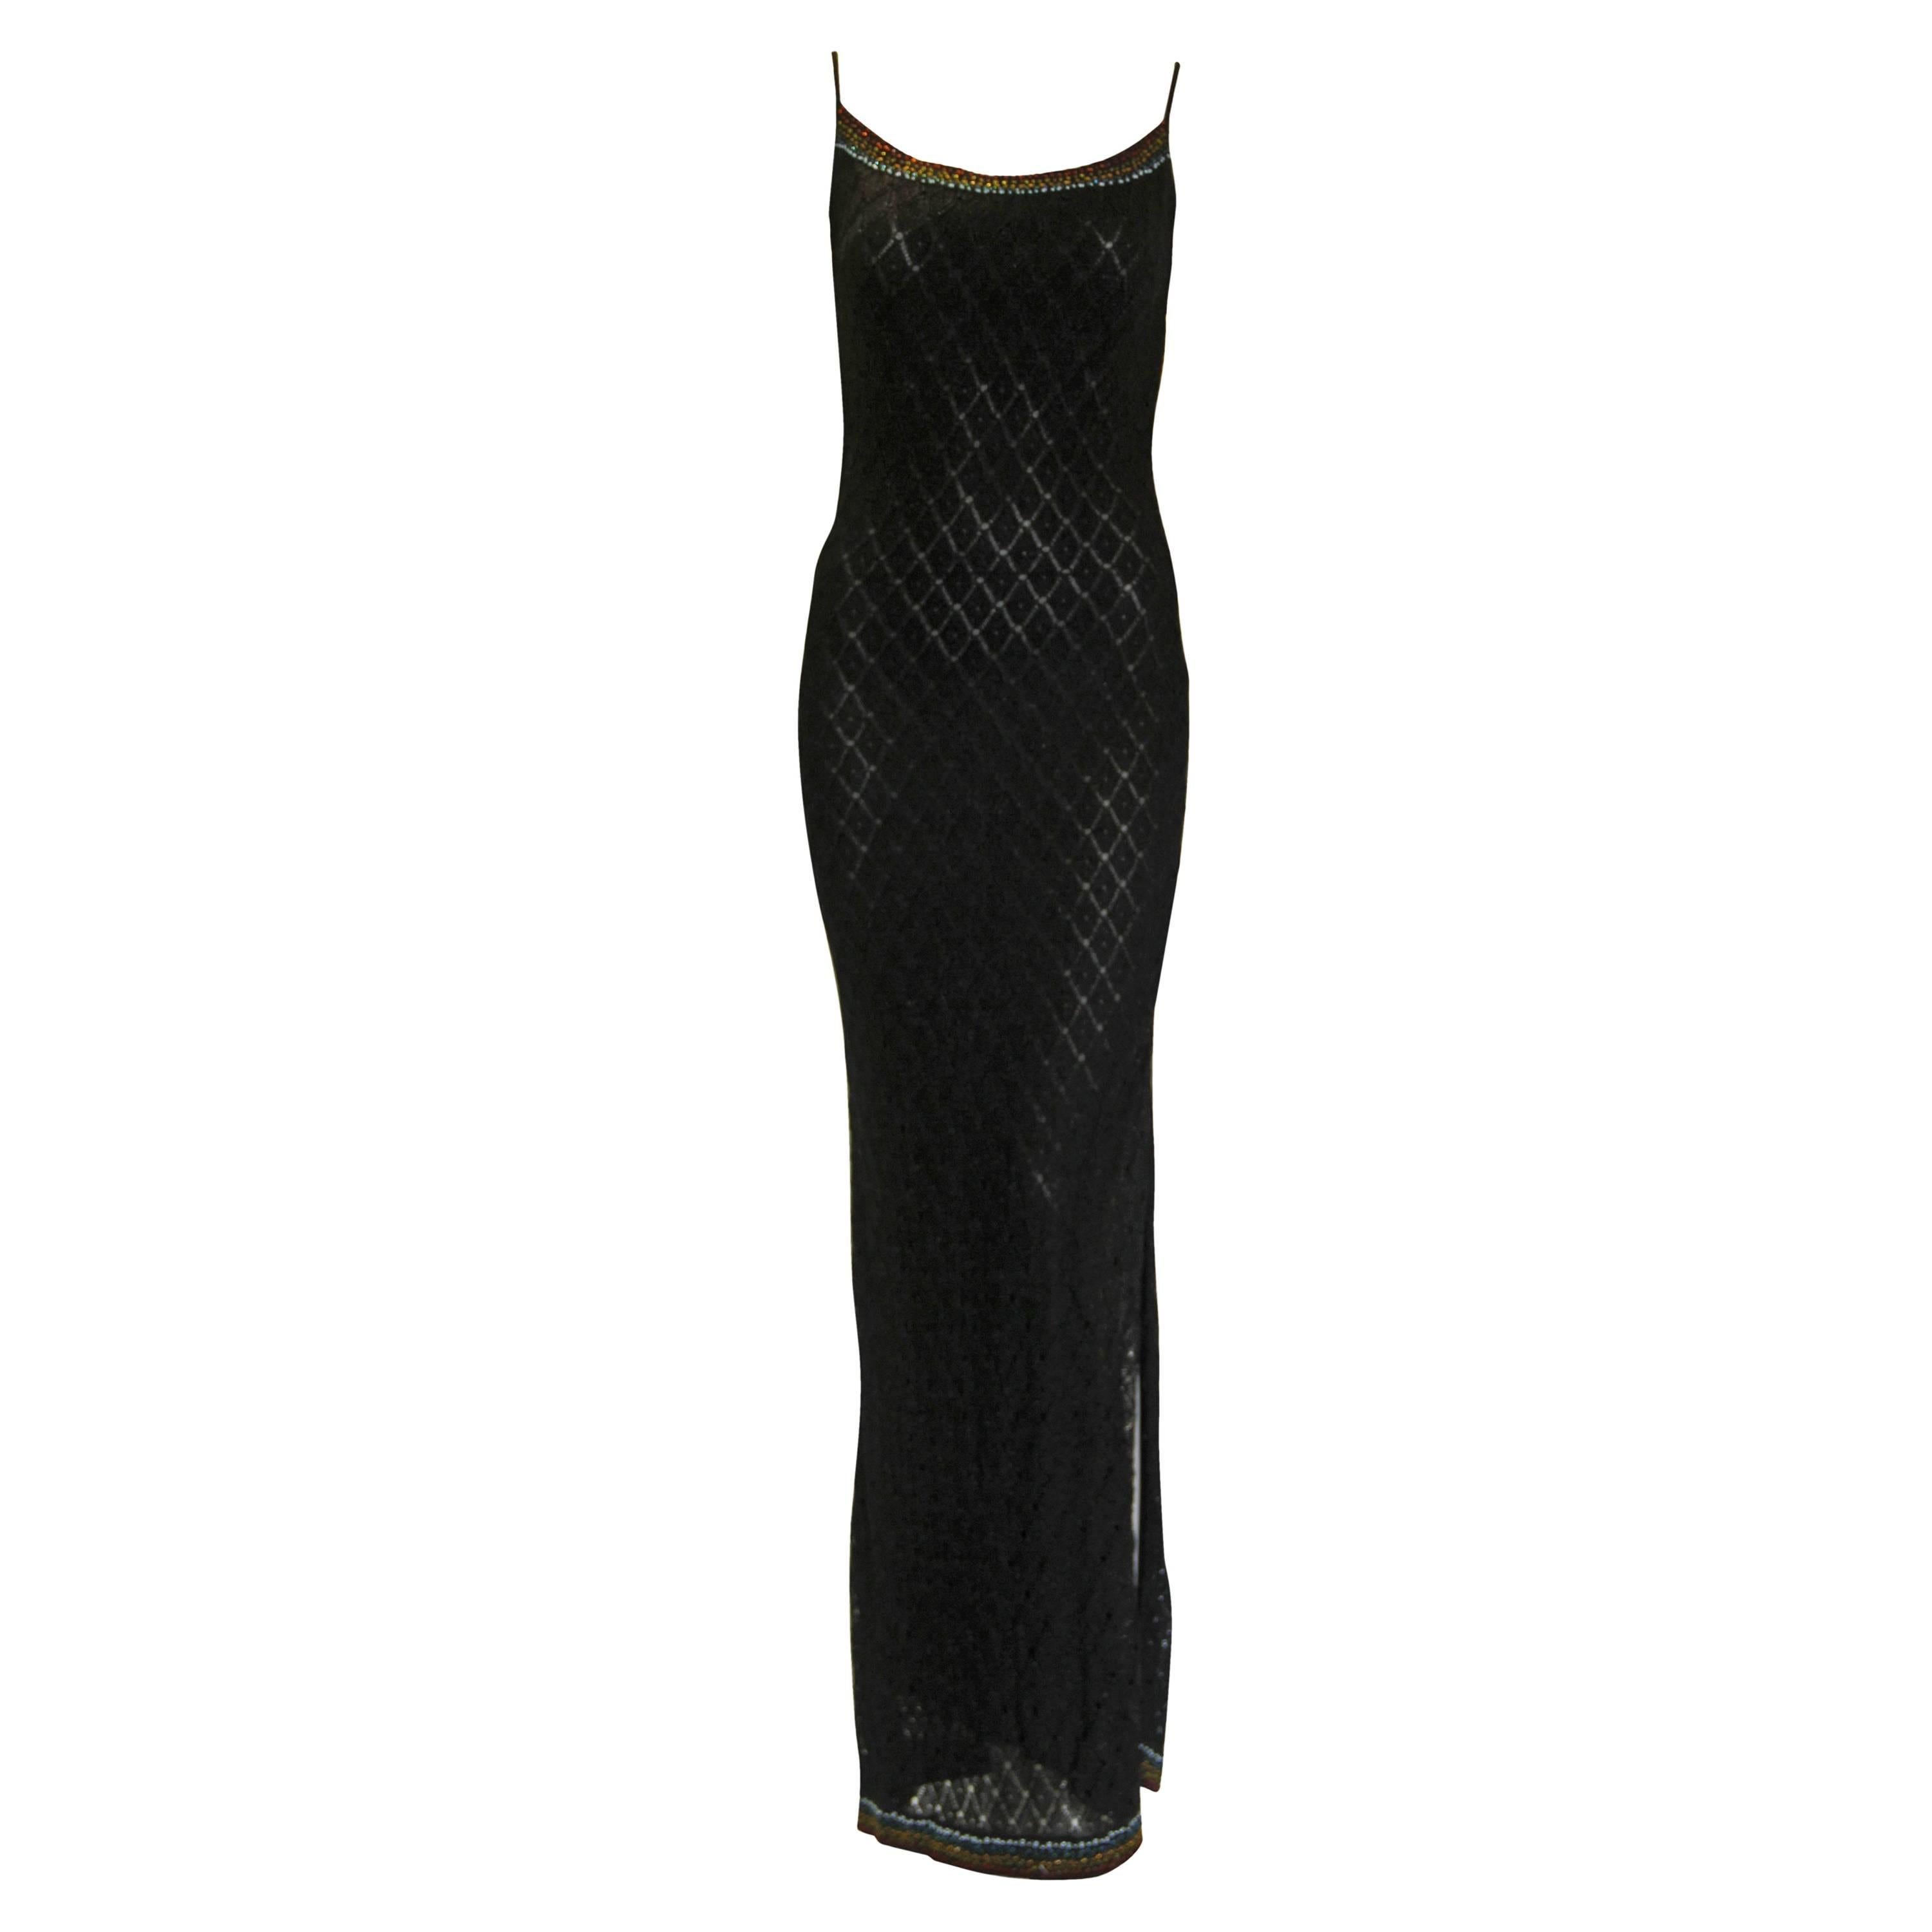 John Galliano For Christian Dior Lurex Knit Beaded Evening Gown Fall 2001 For Sale